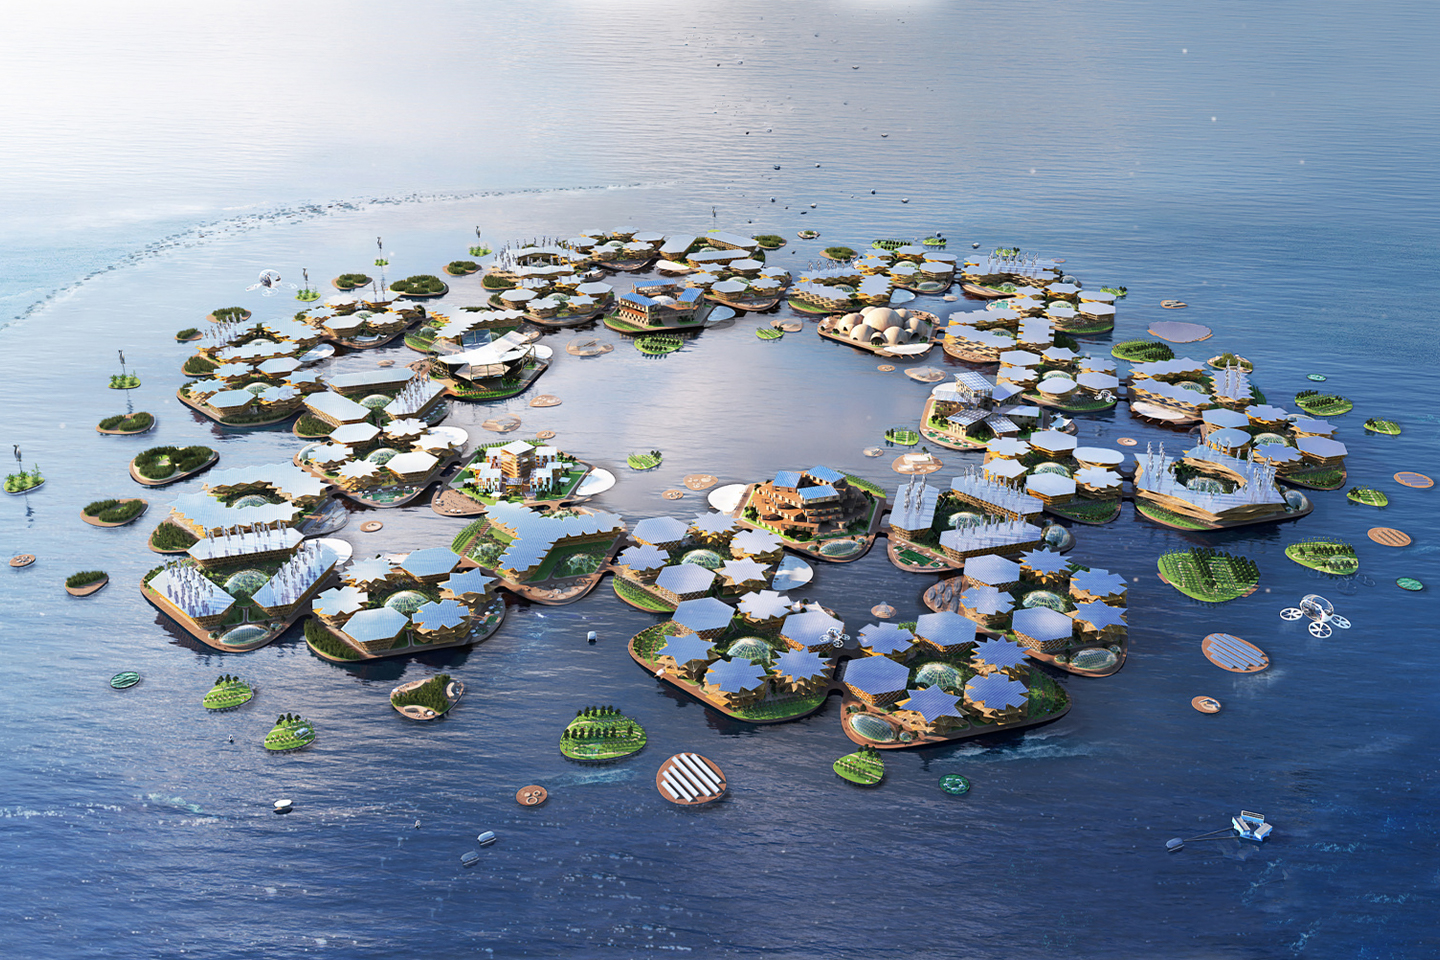 The world’s first floating city designed by BIG & backed by UN can withstand Category 5 hurricans!